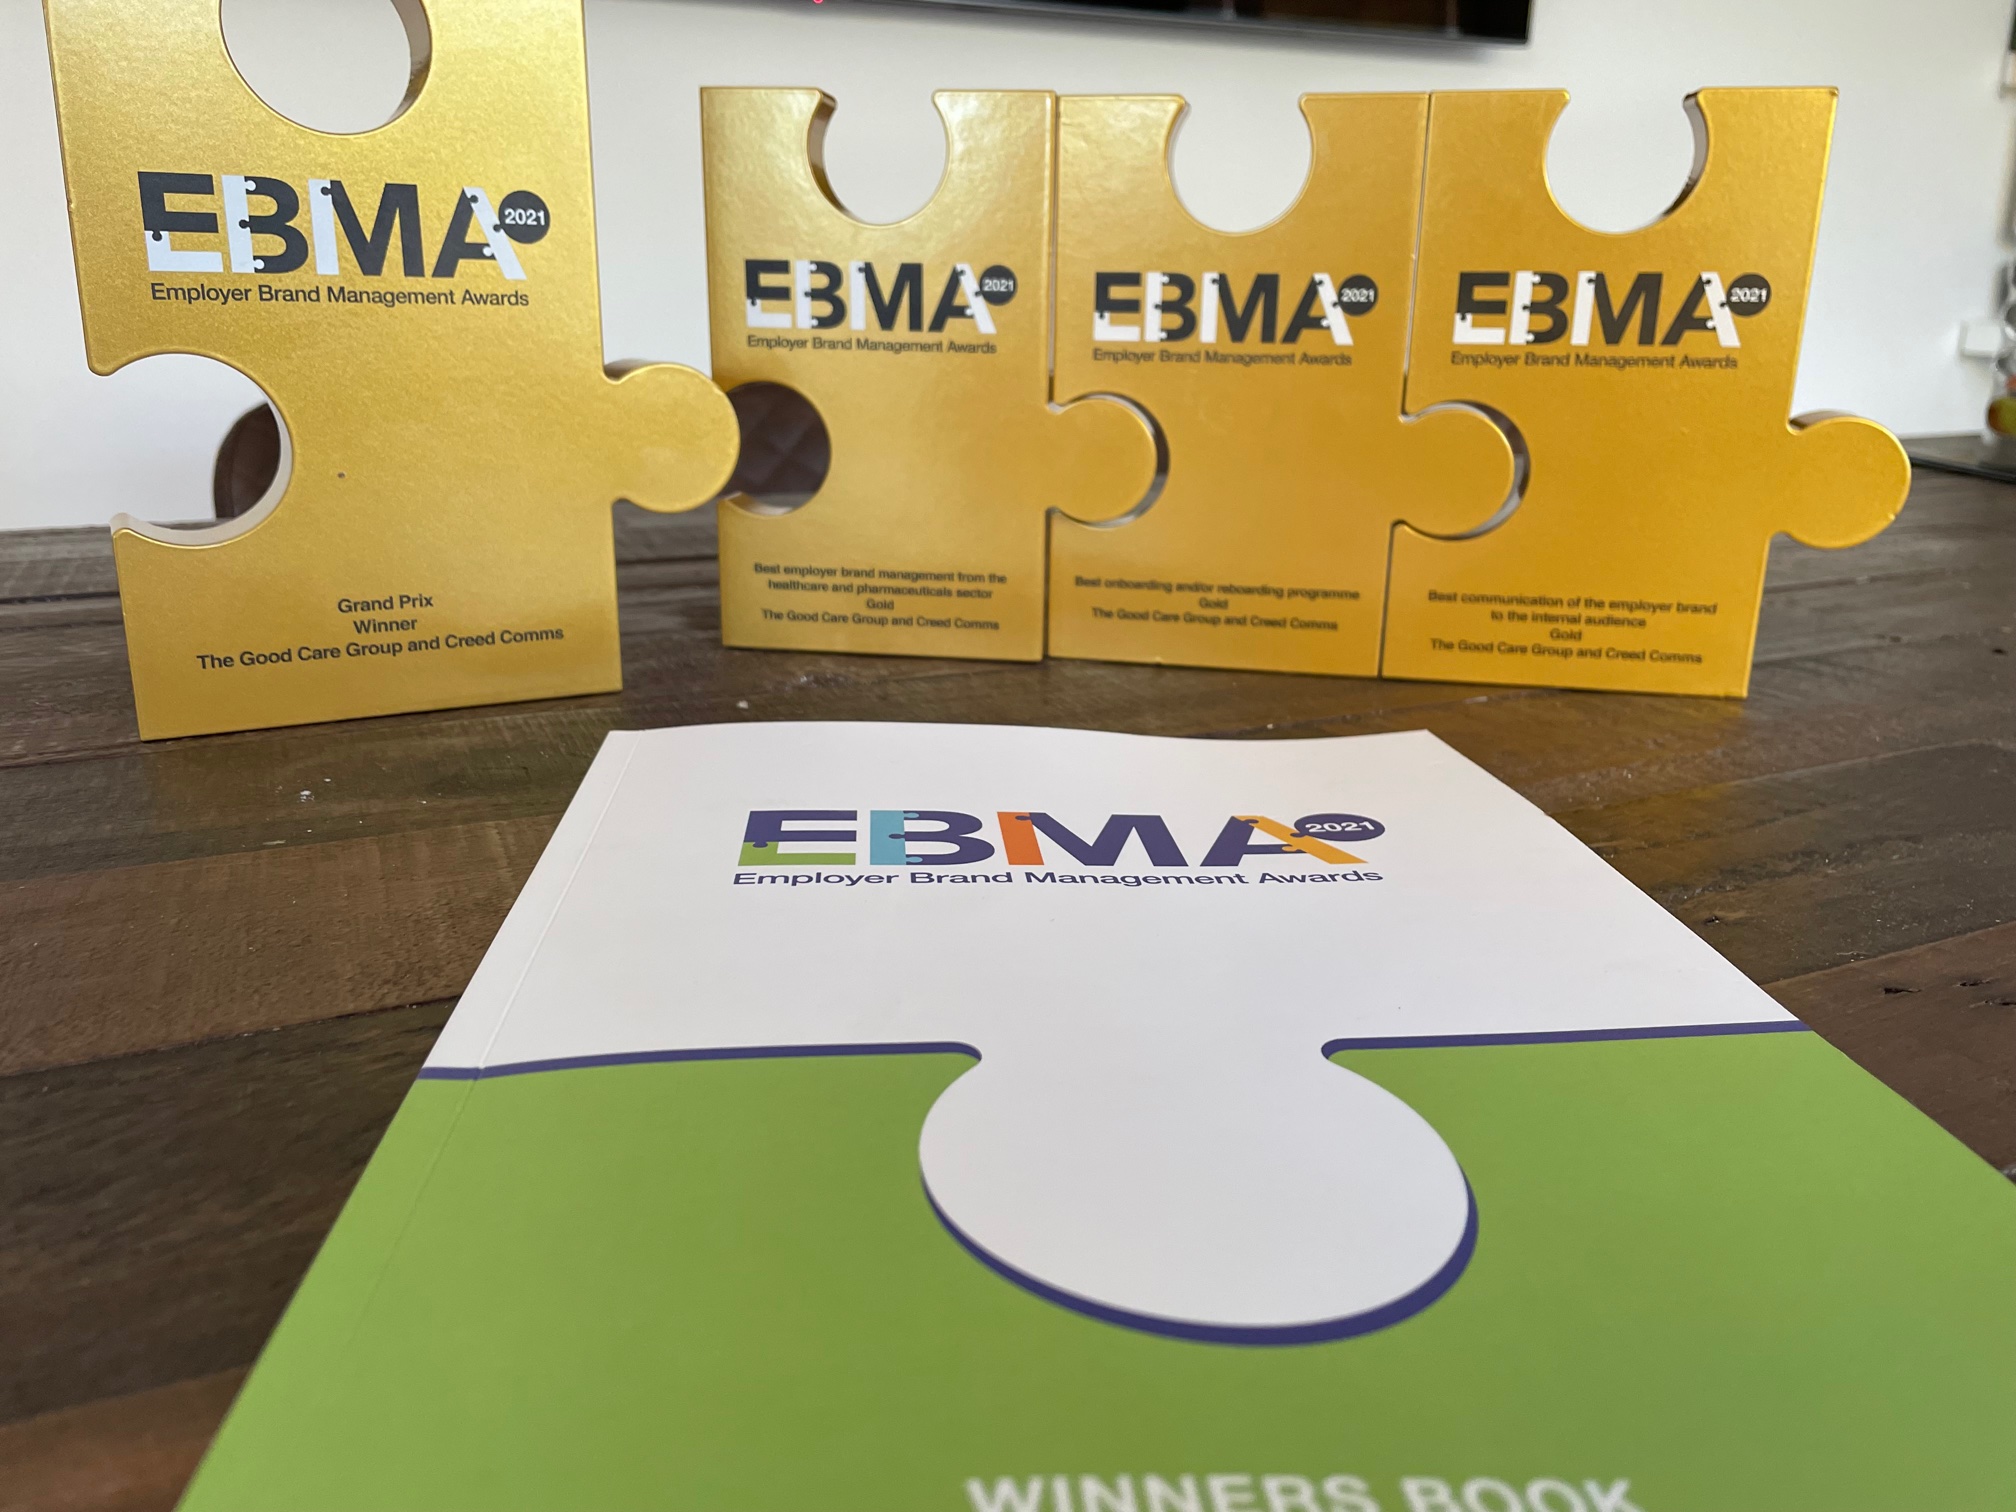 Winners at the Employer Brand Management Awards